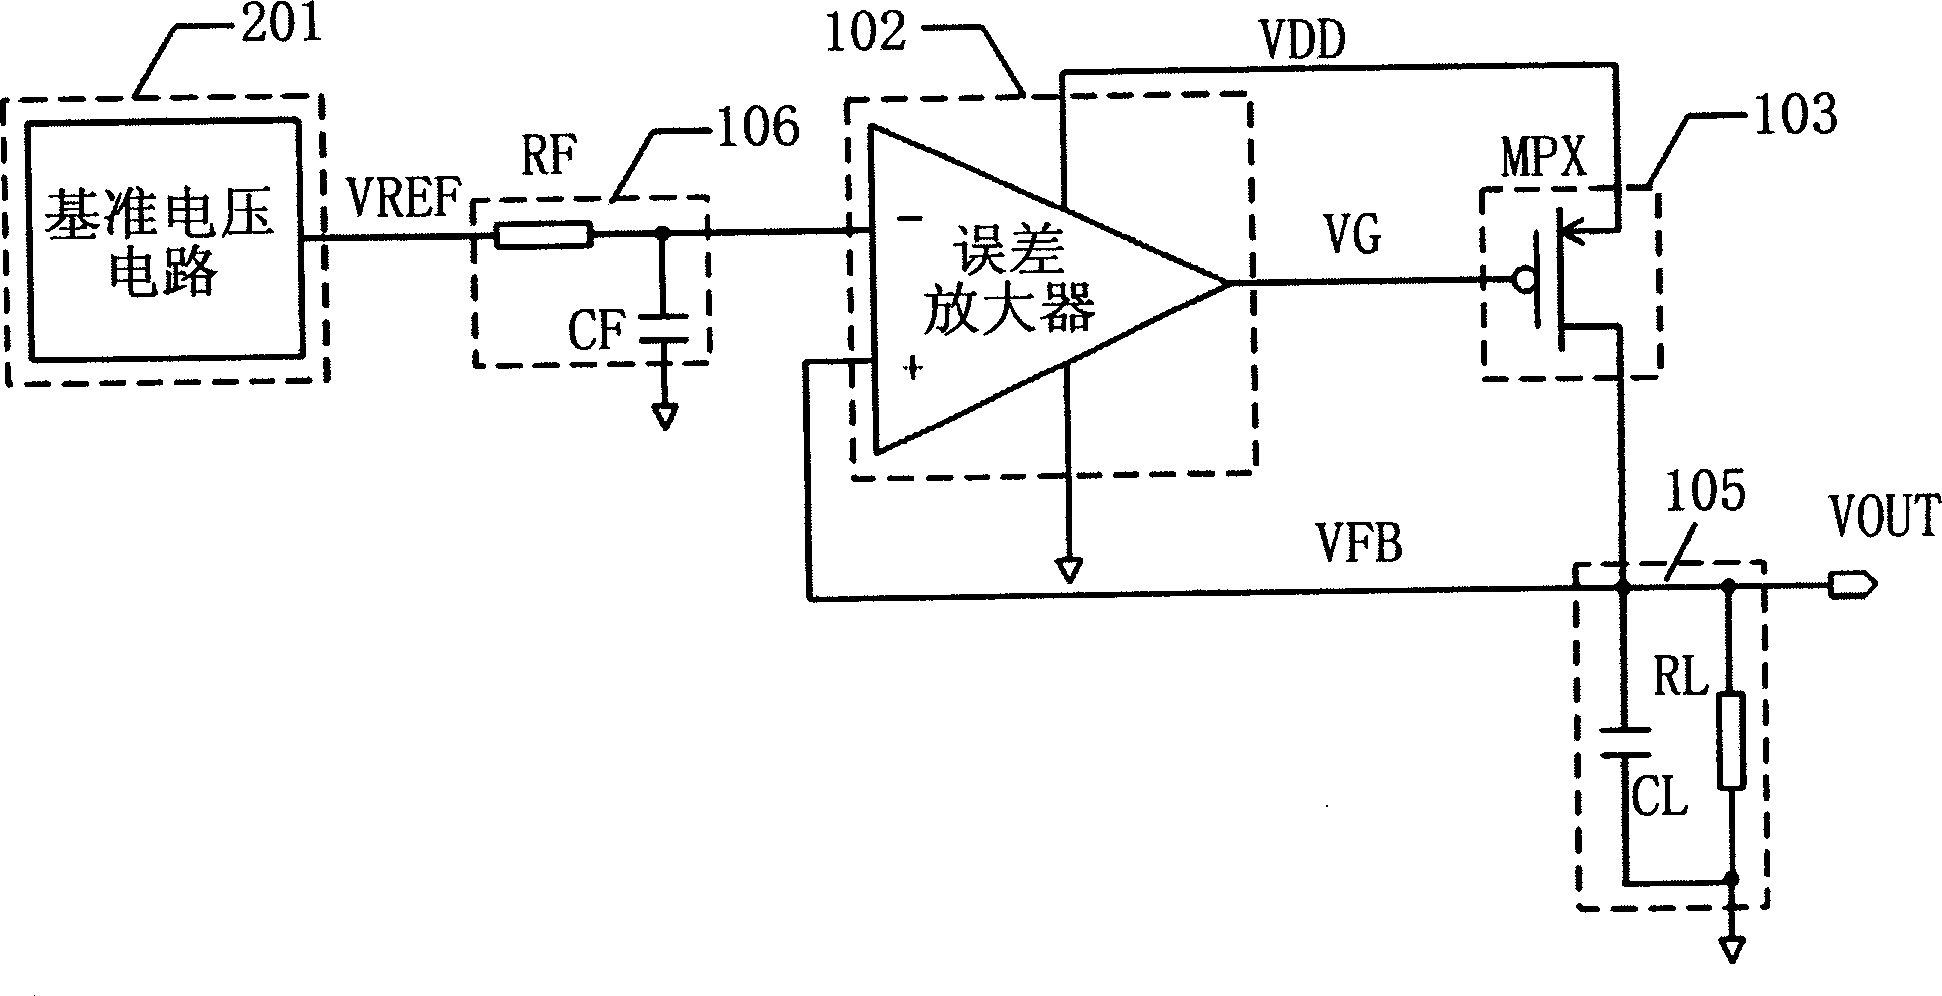 Low voltage difference linear voltage stabilizer circuit